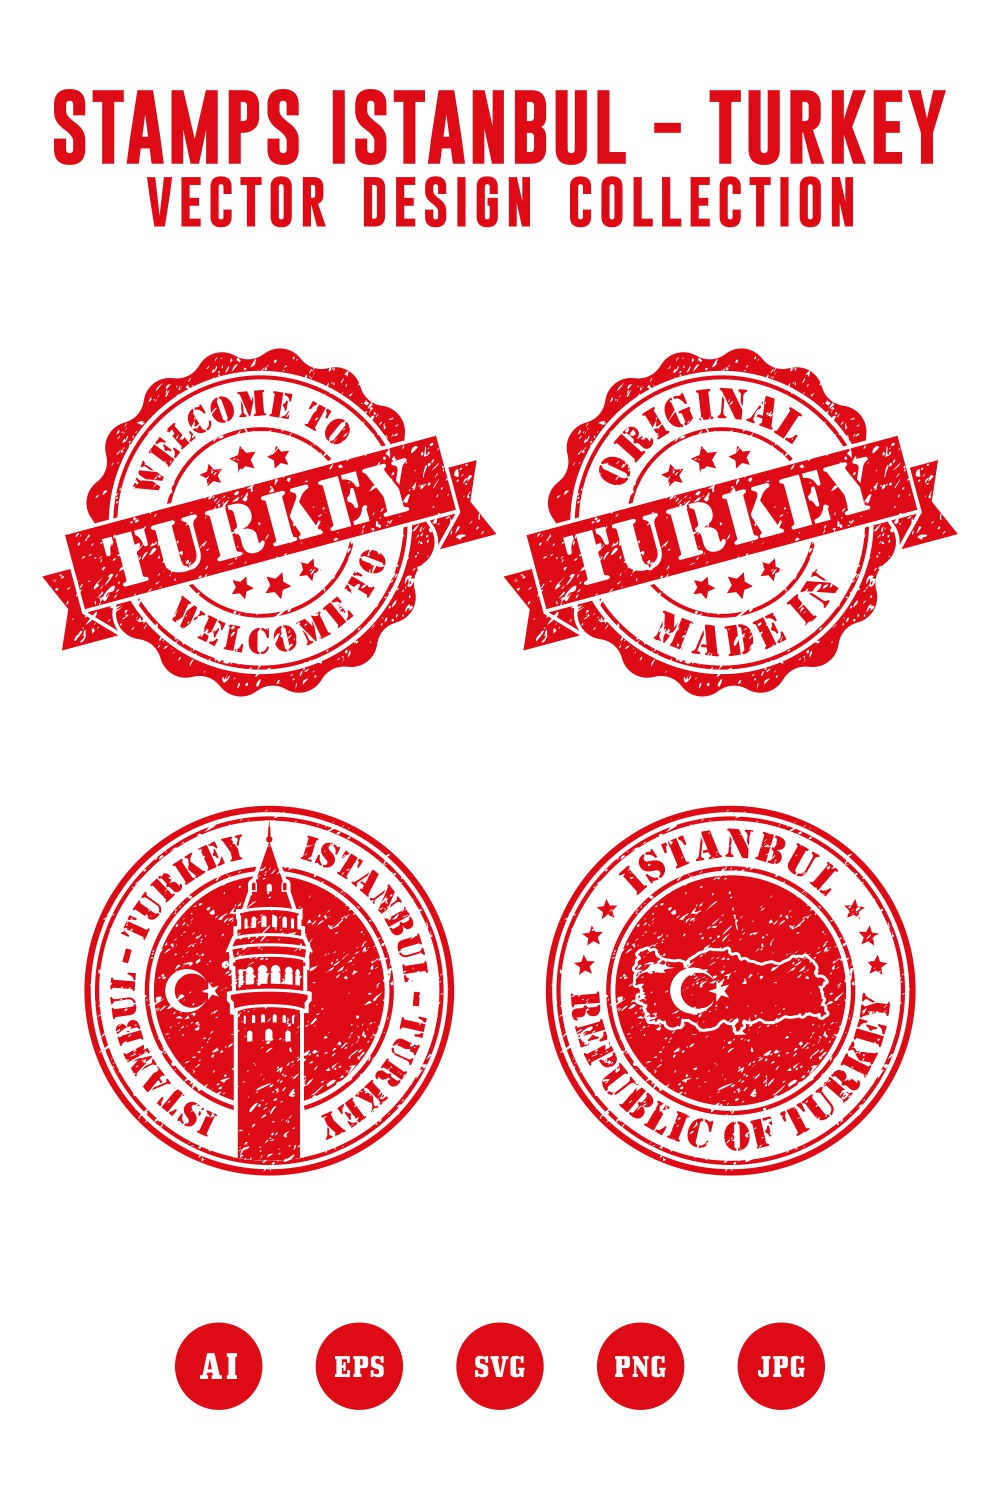 welcome to Istanbul Turkey vector logo collection - $4 pinterest preview image.